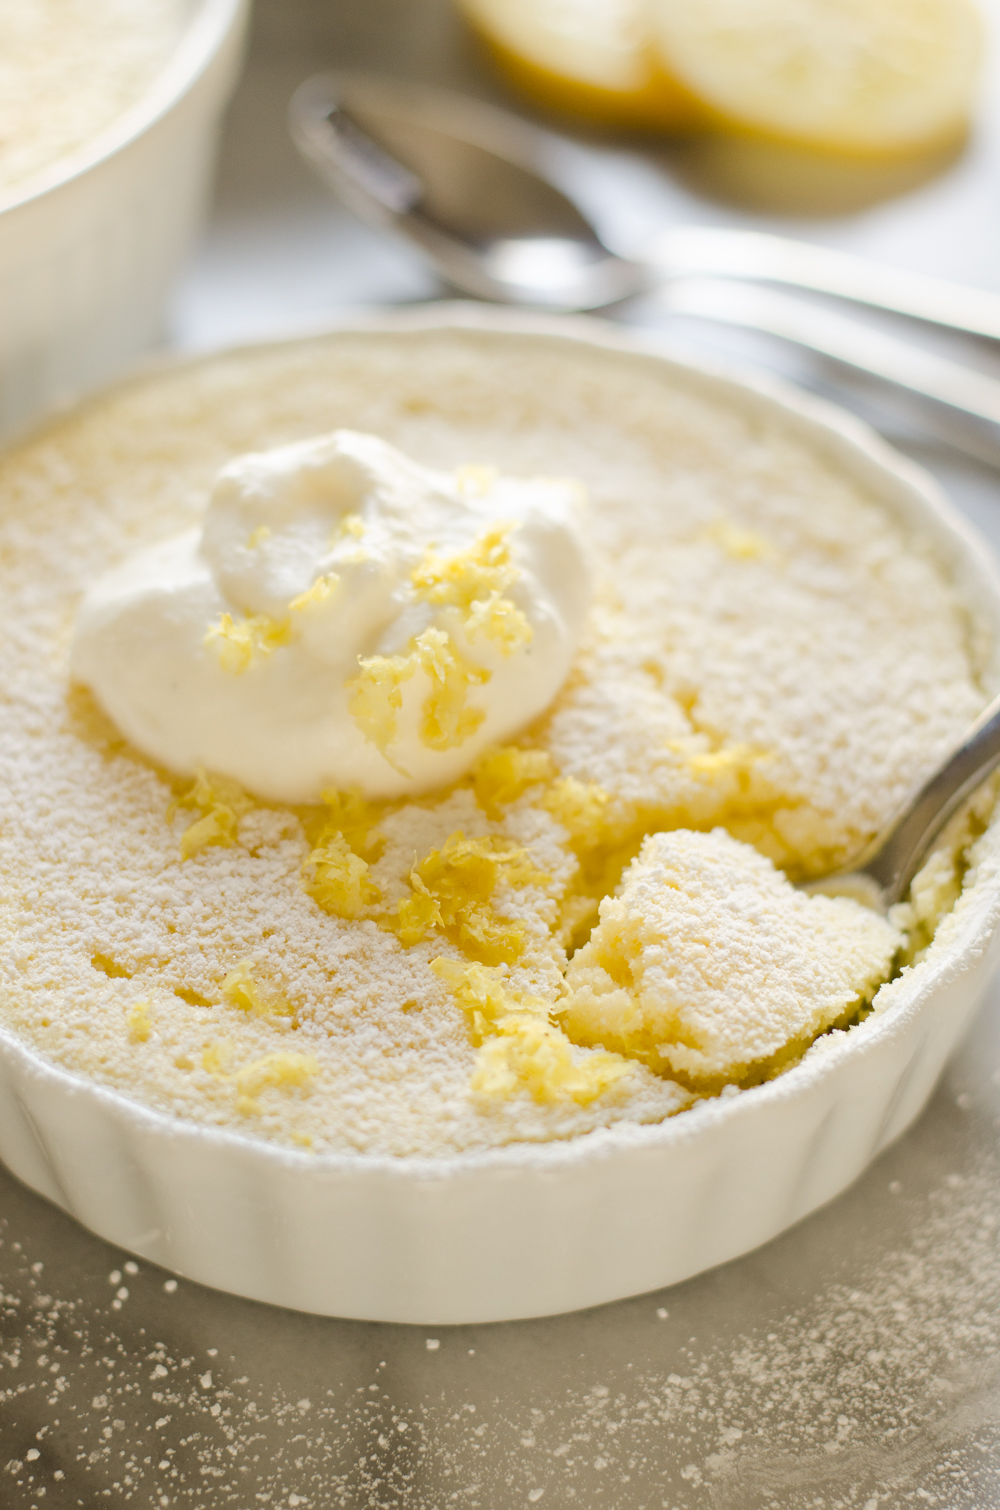 These fancy Lemon Soufflé Pudding Cakes are a single-serve dessert that takes less than an hour to make. The perfect date night mini dessert that’s also great for entertaining guests.